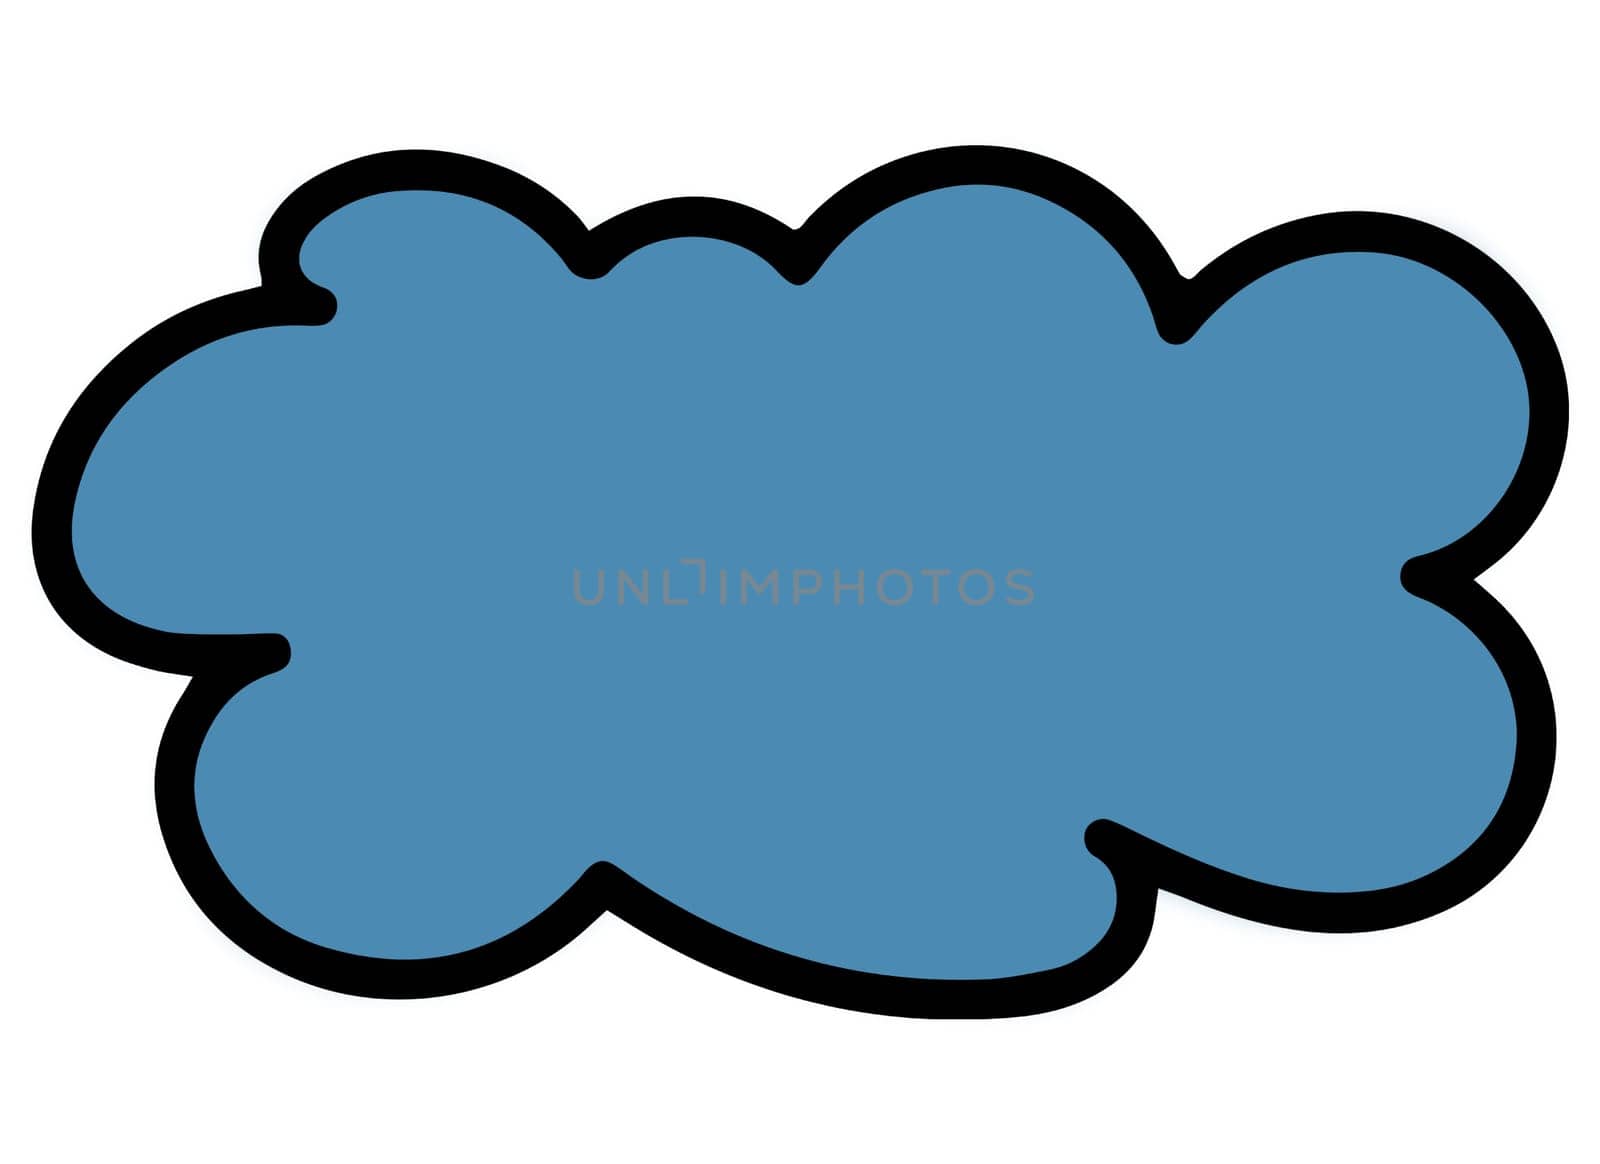 Cloud Emoji Symbol. Illustration Design Art. Blue Cloud in Flat Style Isolated on White Background. Minimal Cloud in Cartoon Style. Funky Cartoon Style One Cloud design element.